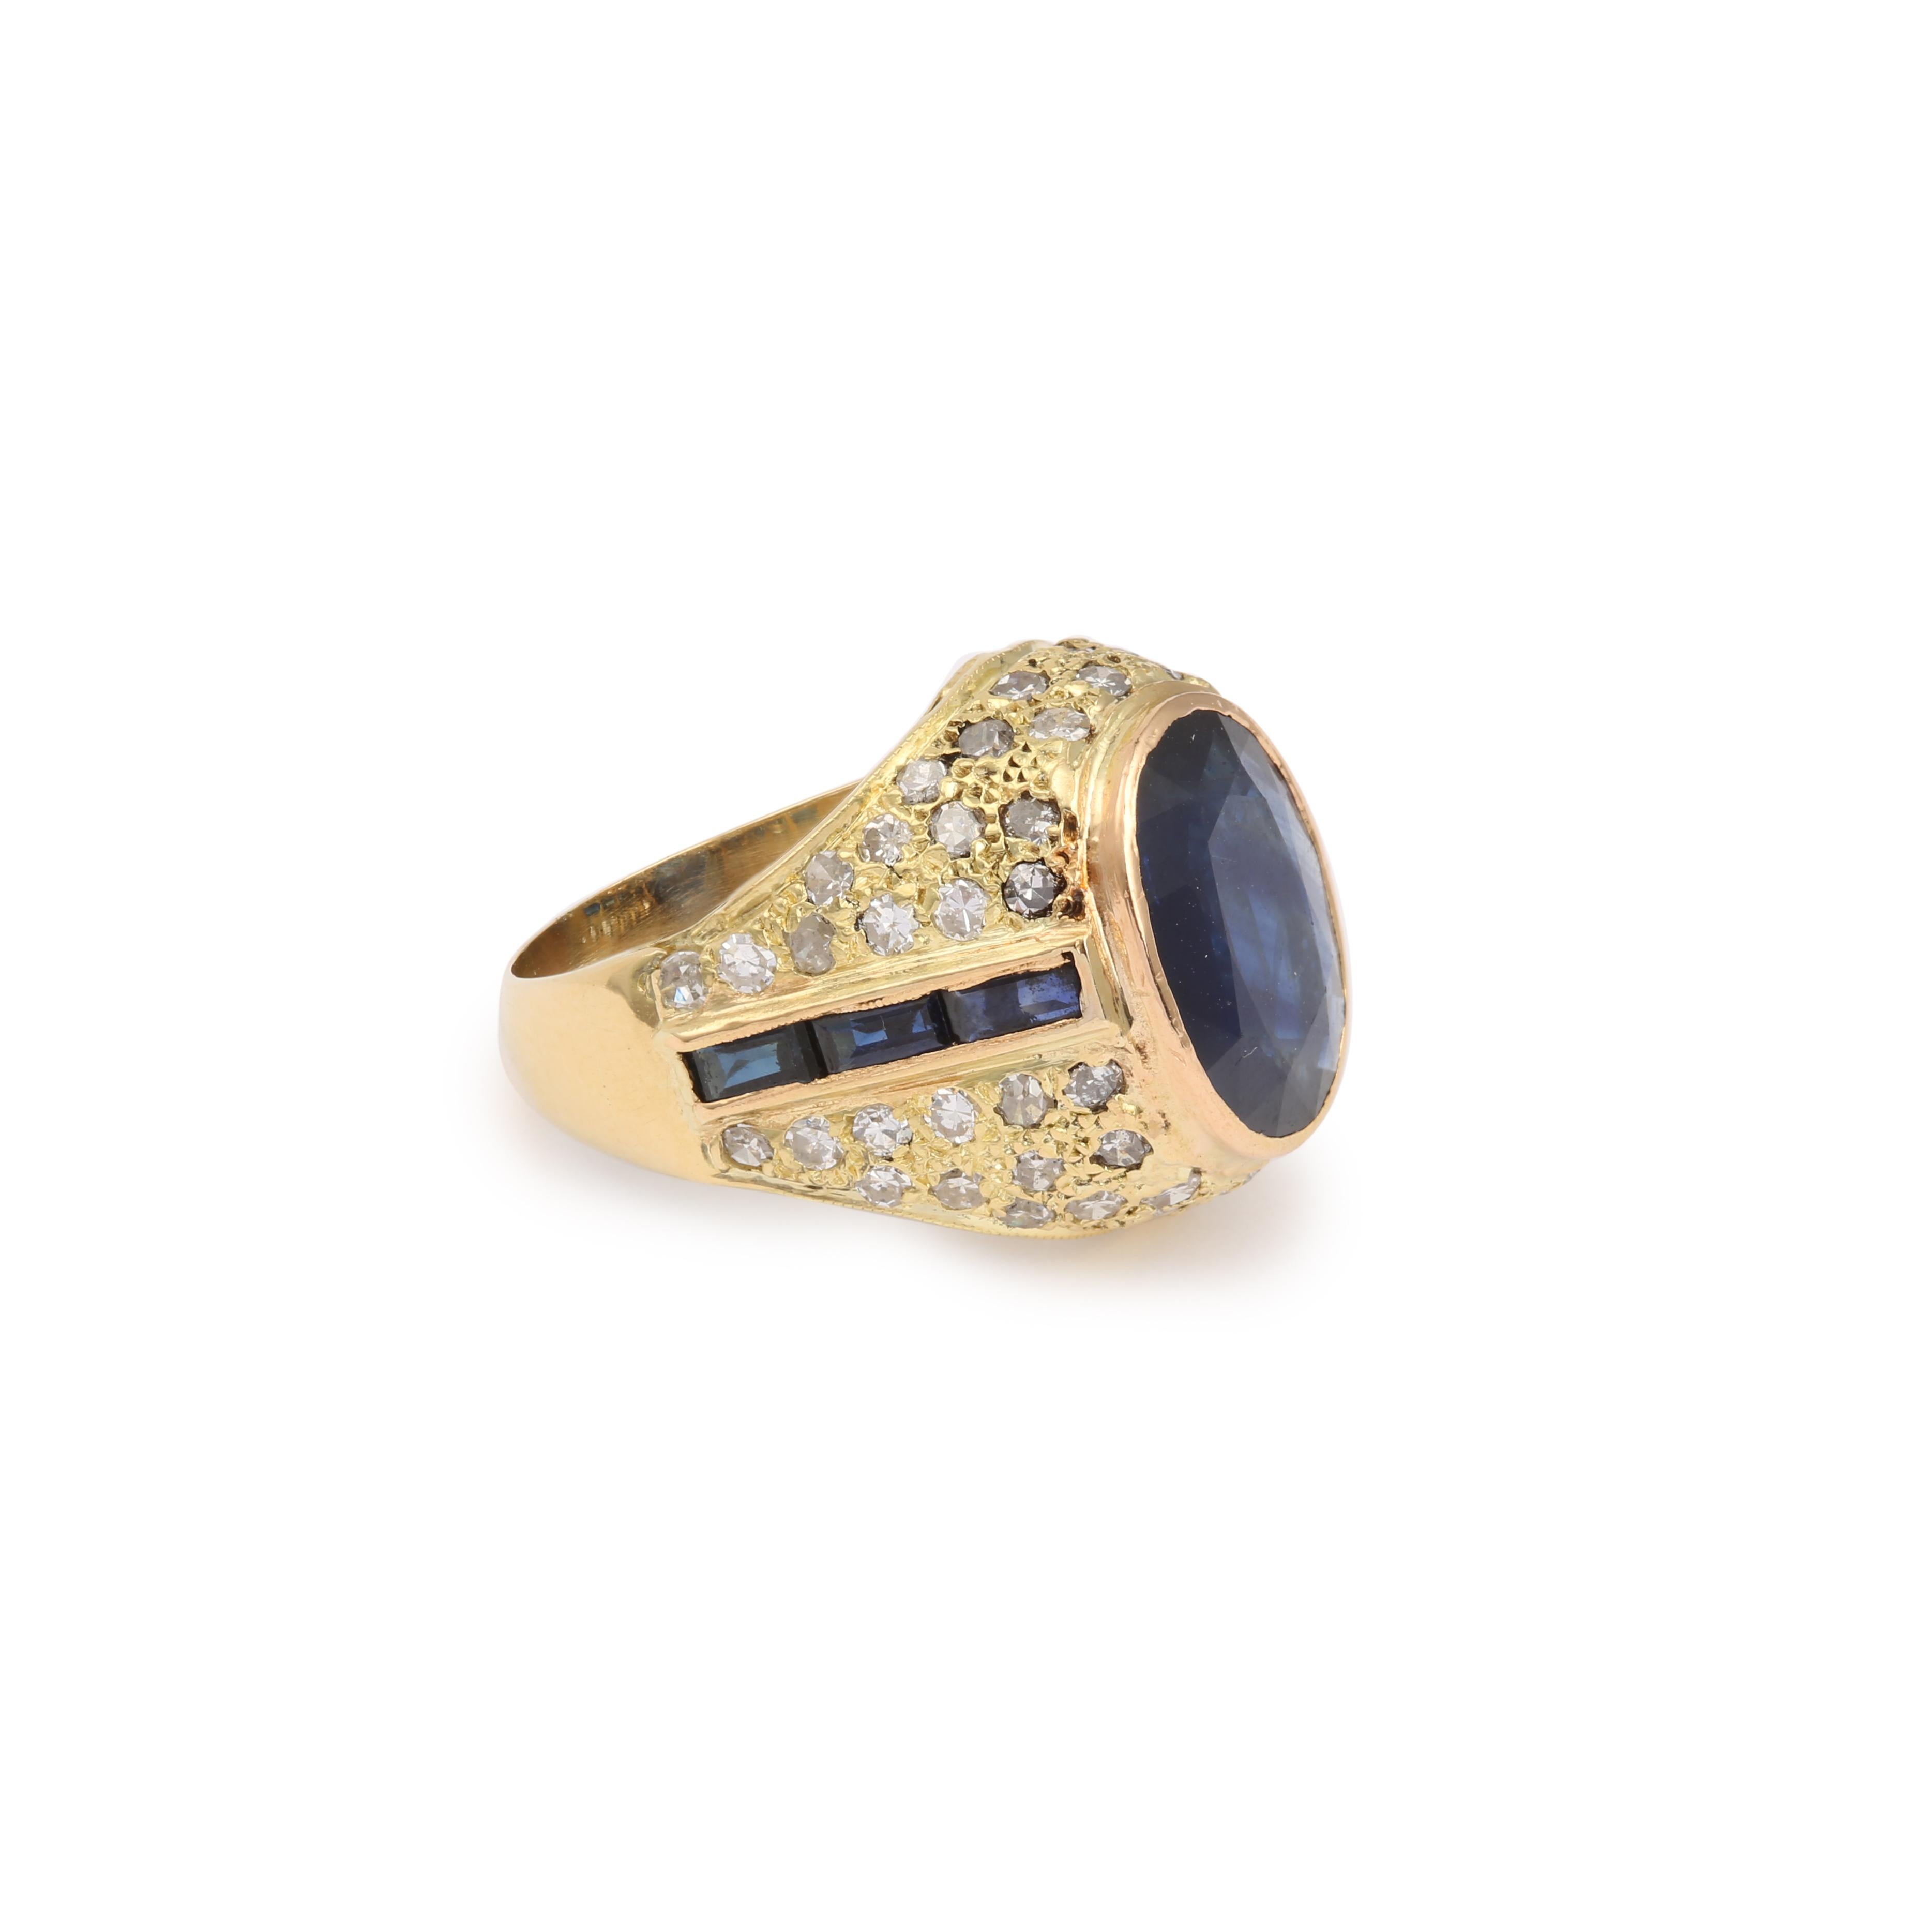 Magnificent yellow gold signet ring set with an oval sapphire, two lines of baguette sapphires and 58 diamonds.

Estimated weight of the central sapphire : 4.19 carats

Total estimated weight of the baguette sapphires : 0.24 carats

Total estimated